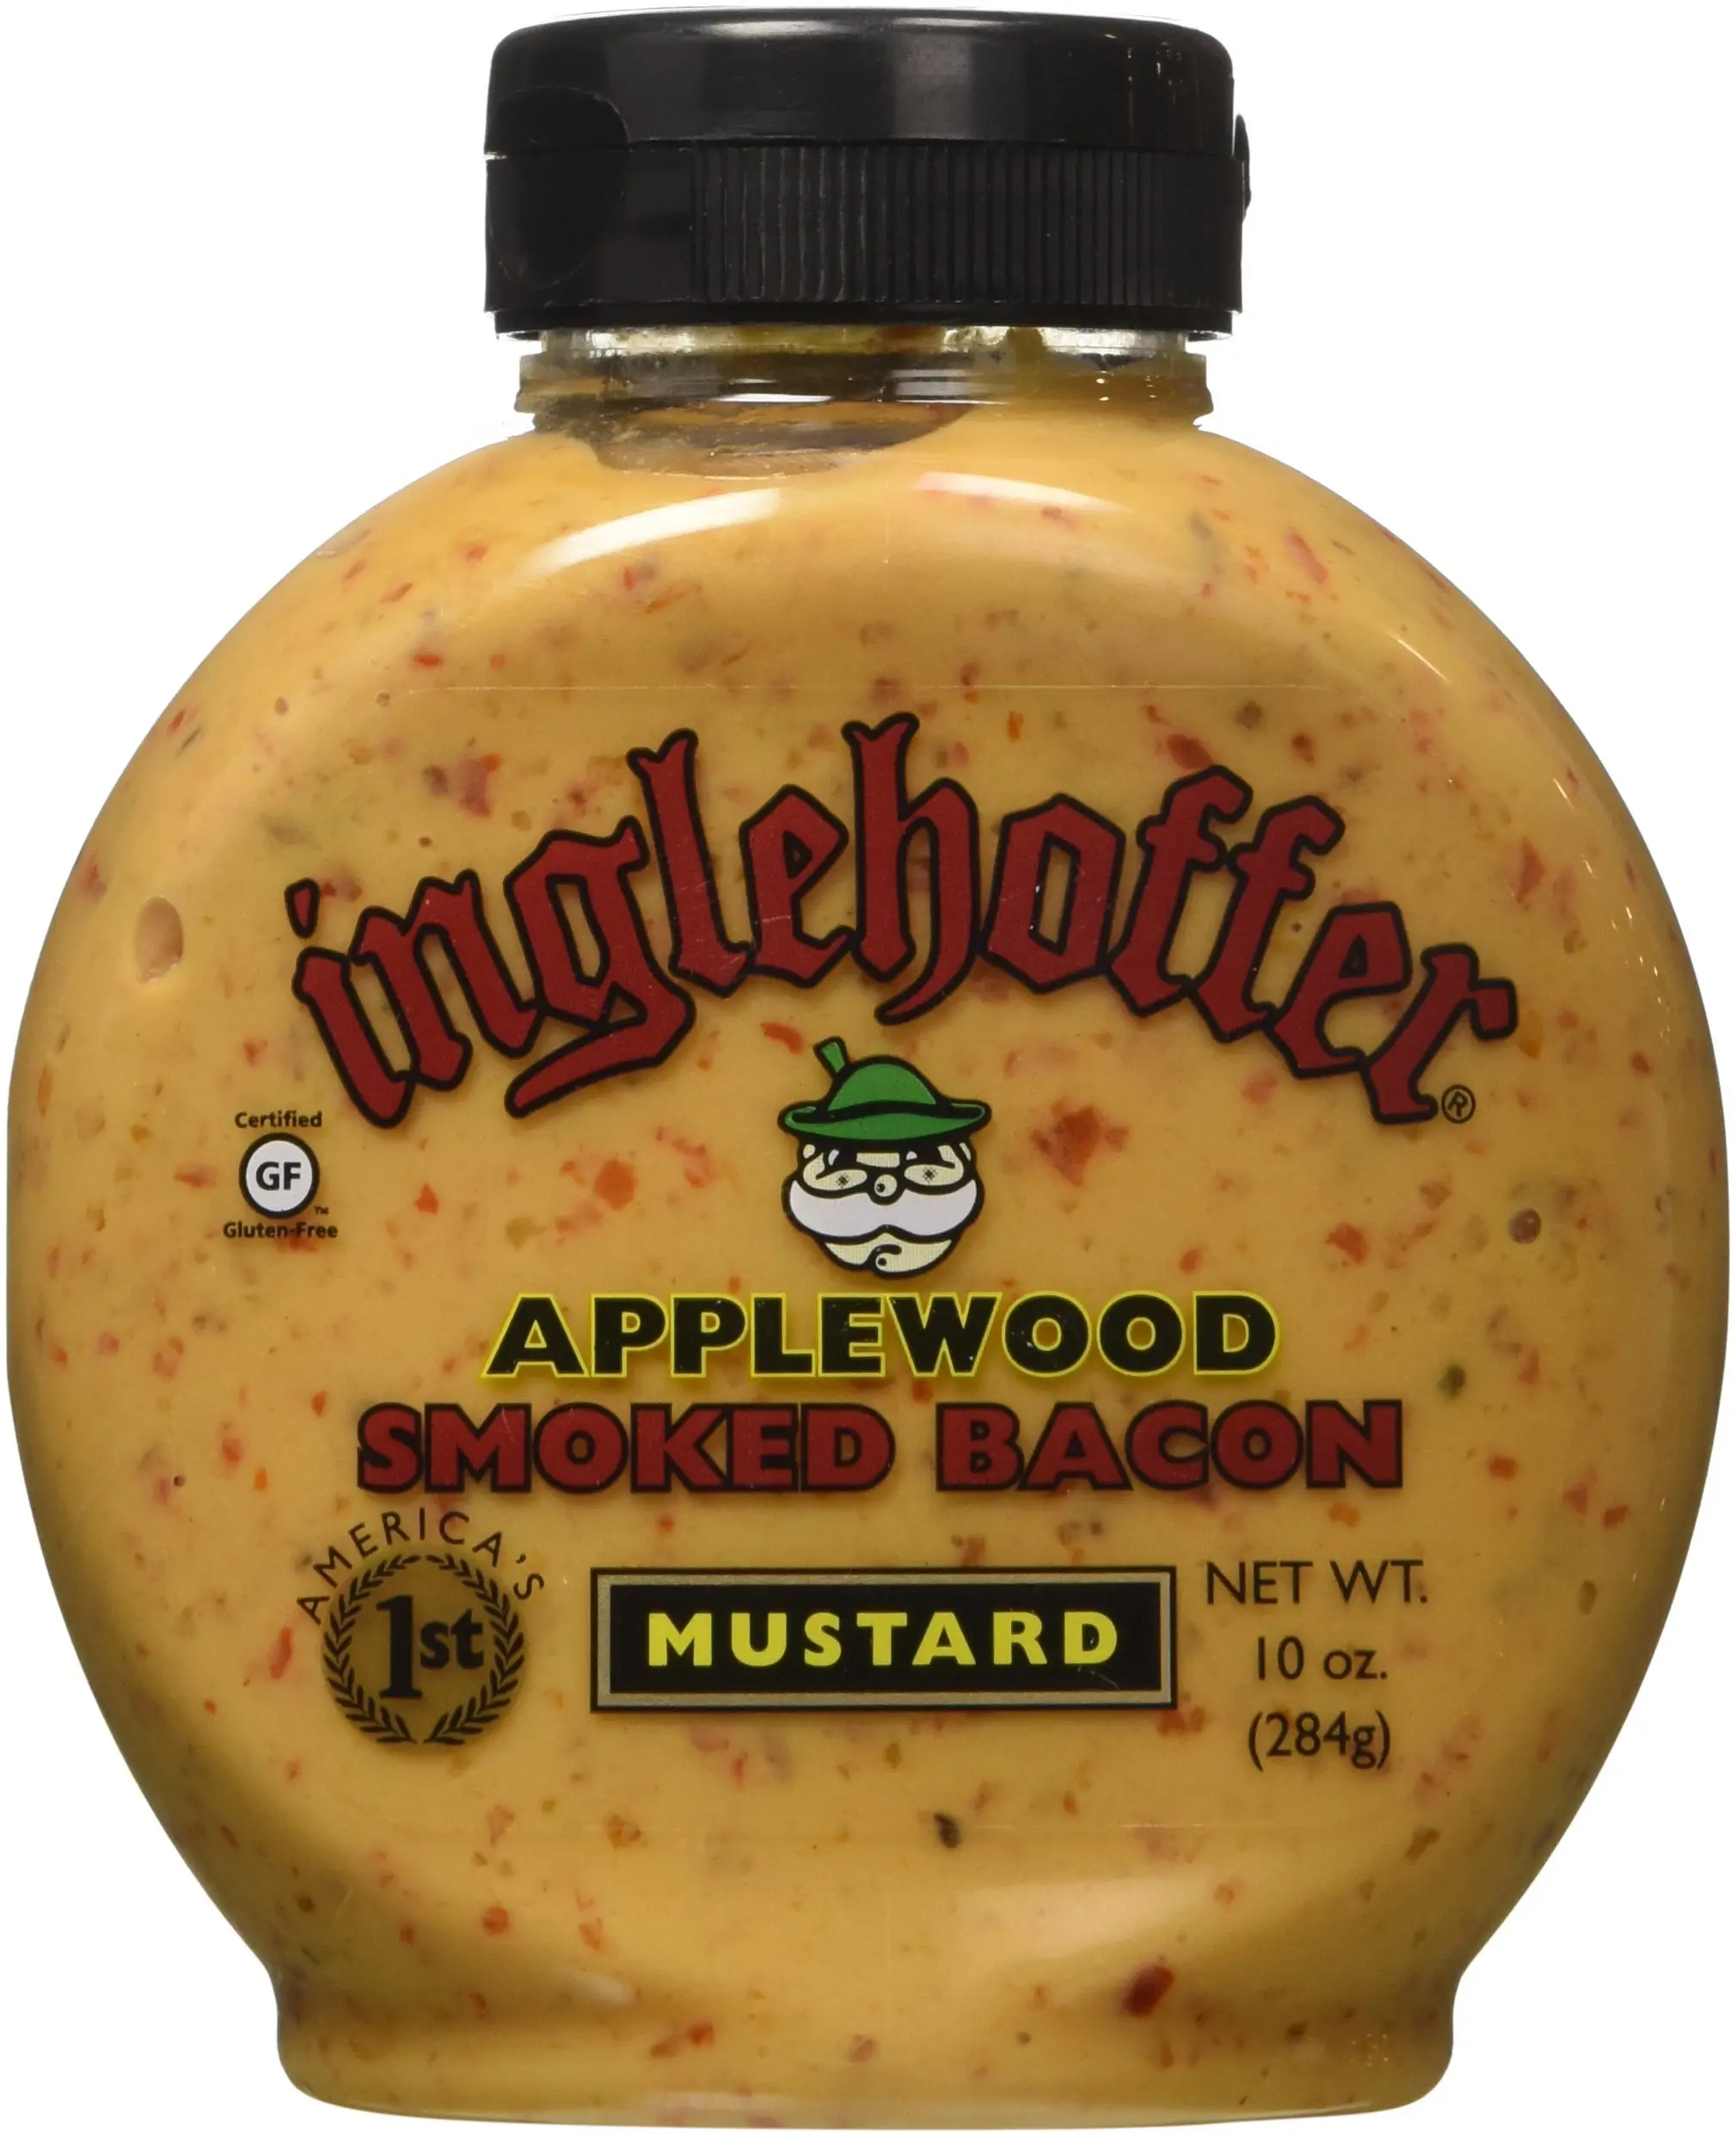 inglehoffer applewood smoked bacon mustard - What does applewood bacon taste like